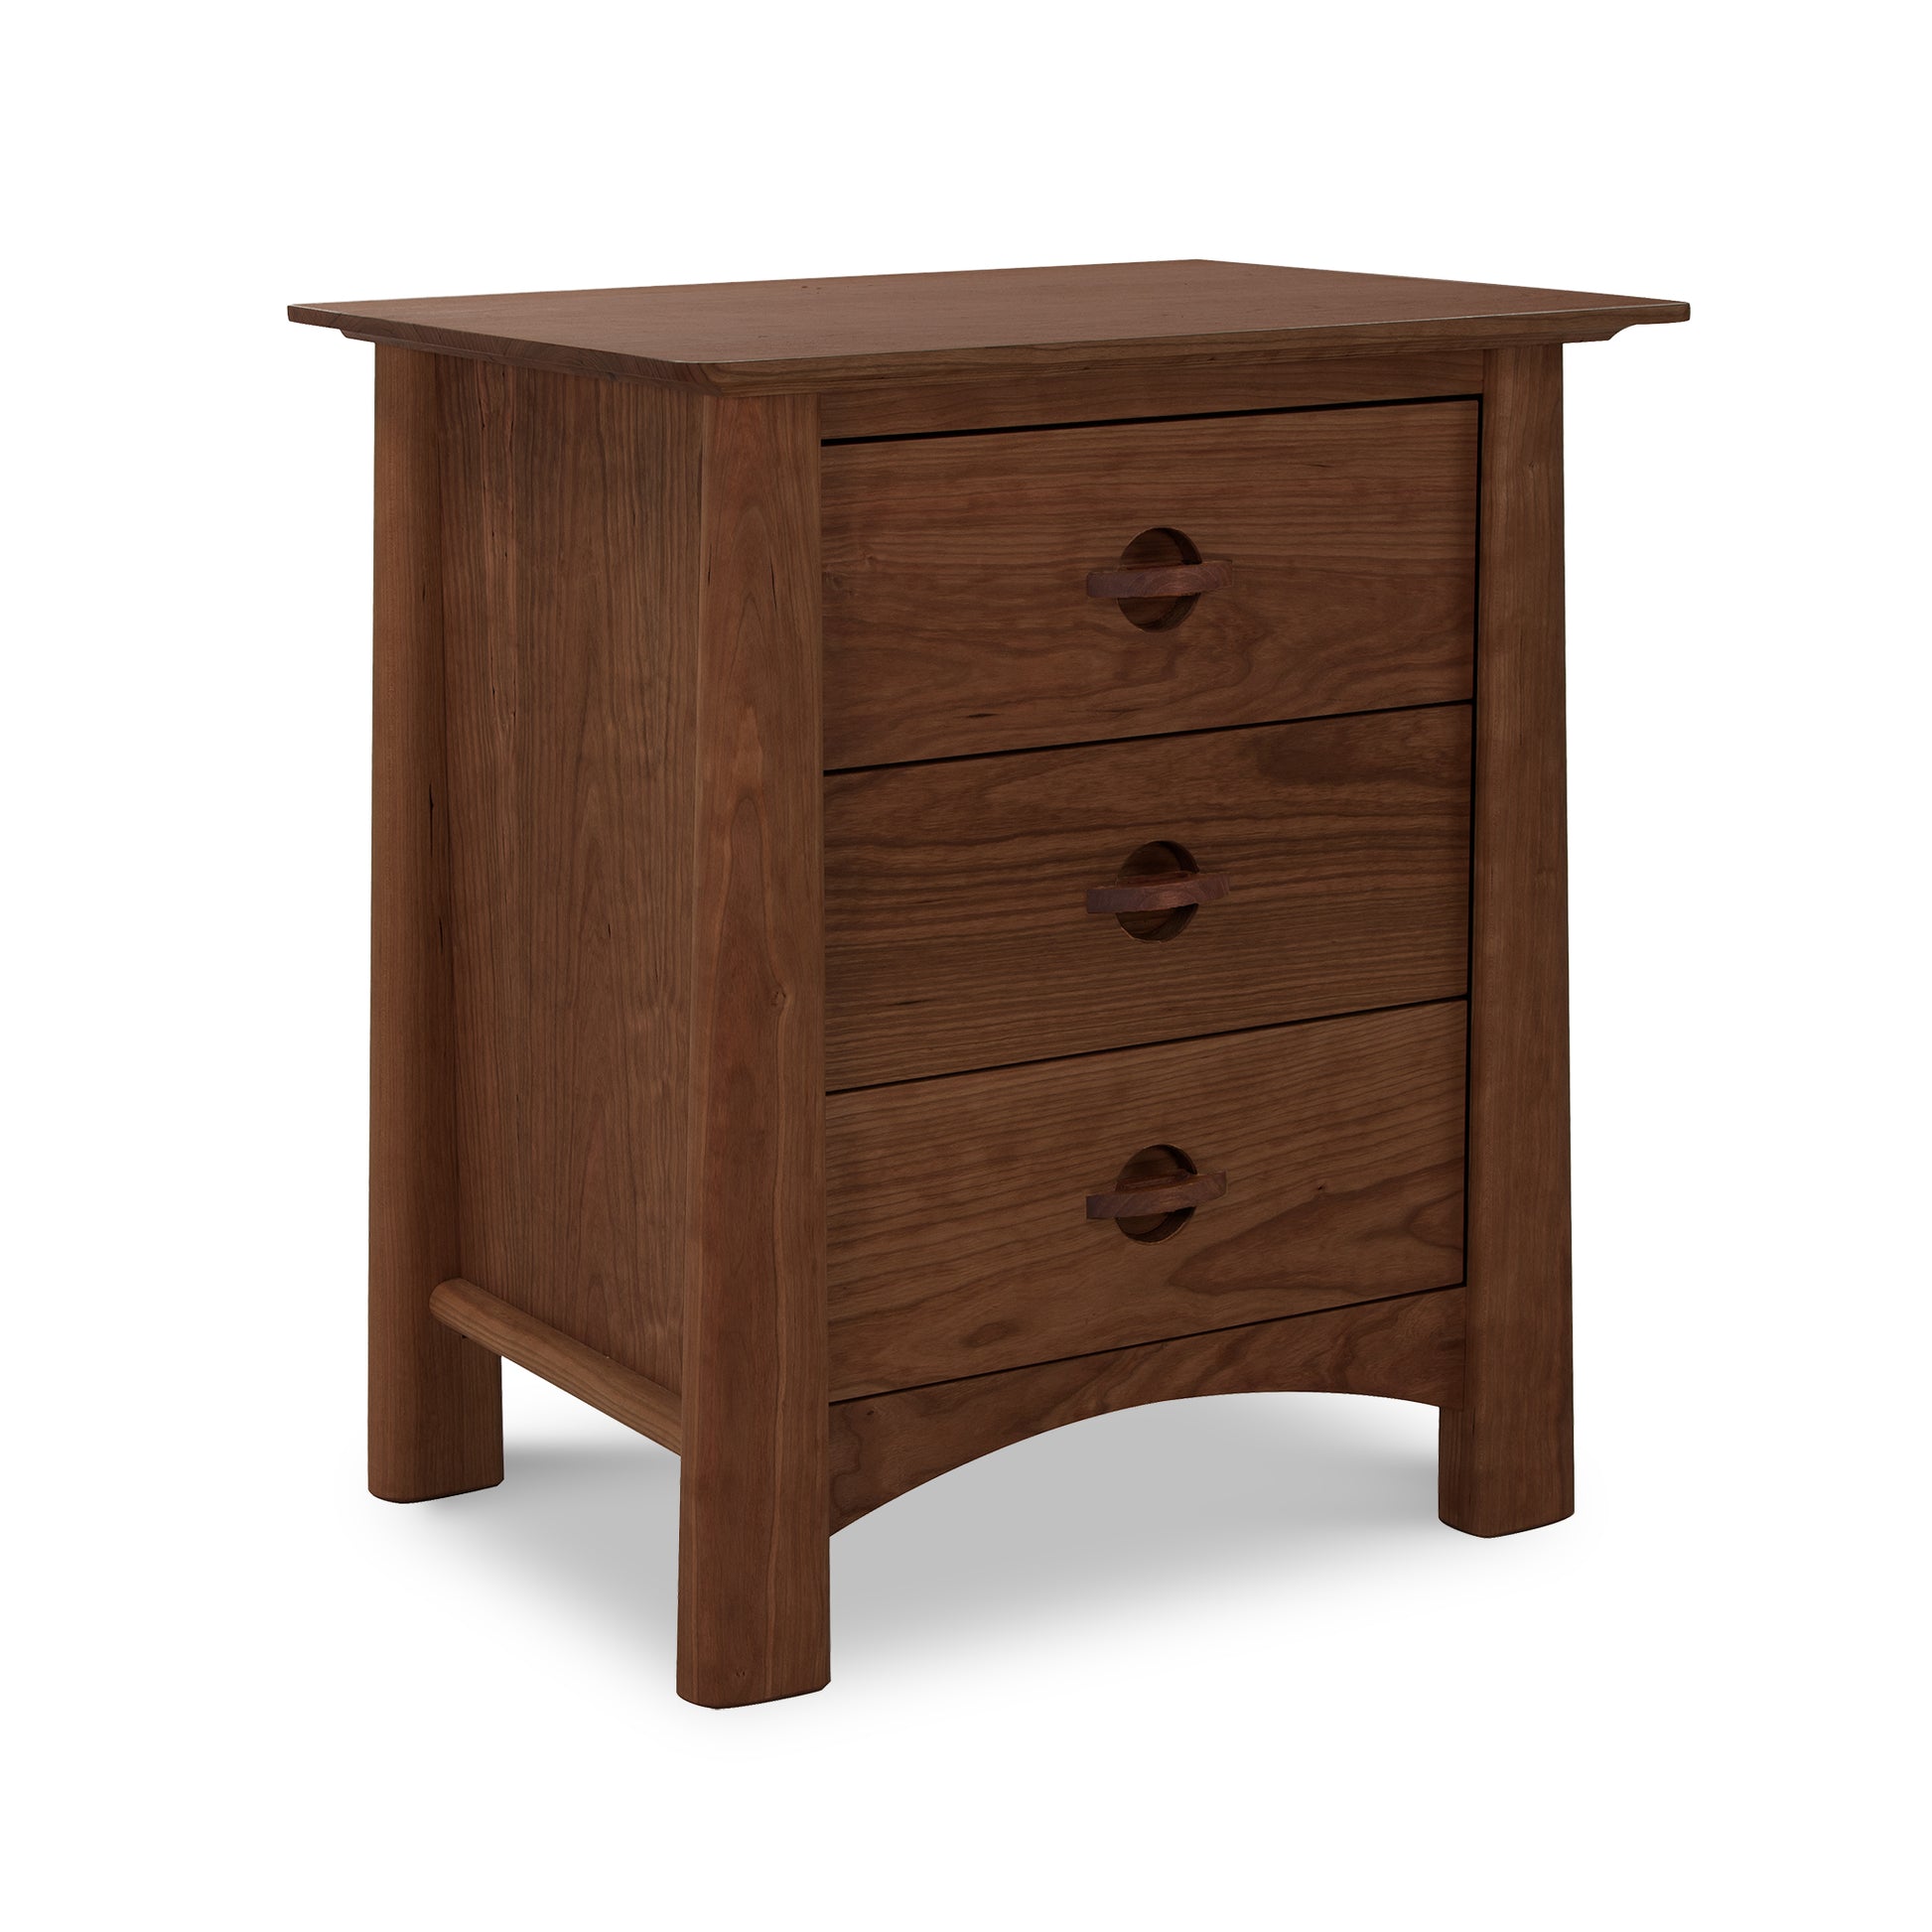 Alt text: Handcrafted solid wood dresser made in Vermont from sustainably harvested hardwoods. This American-made furniture piece features three drawers with round handles, a flat top surface, and slightly curved legs. The medium to dark brown finish complements the classic style of Maple Corner Woodworks Cherry Moon 3-Drawer Nightstand. Perfect for a high-quality bedroom set.